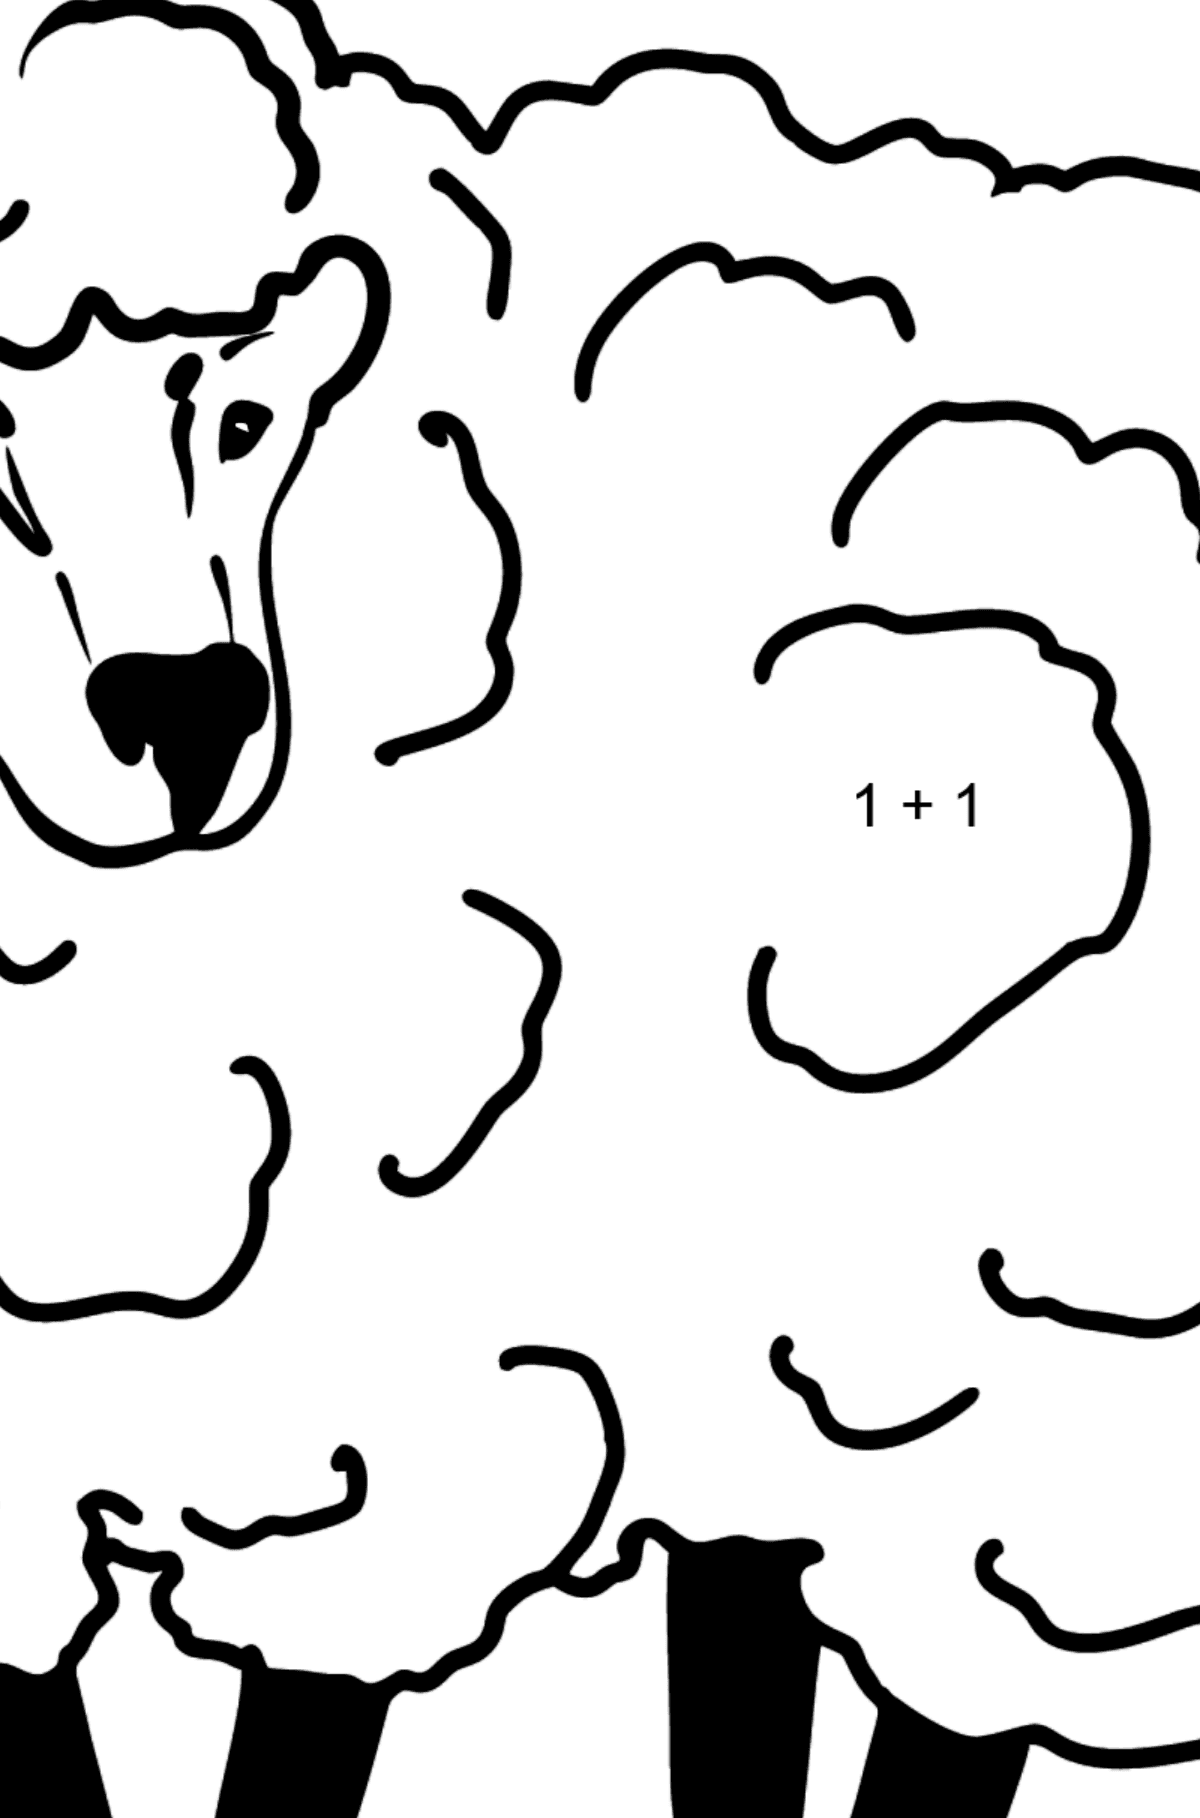 Sheep coloring page - Math Coloring - Addition for Kids